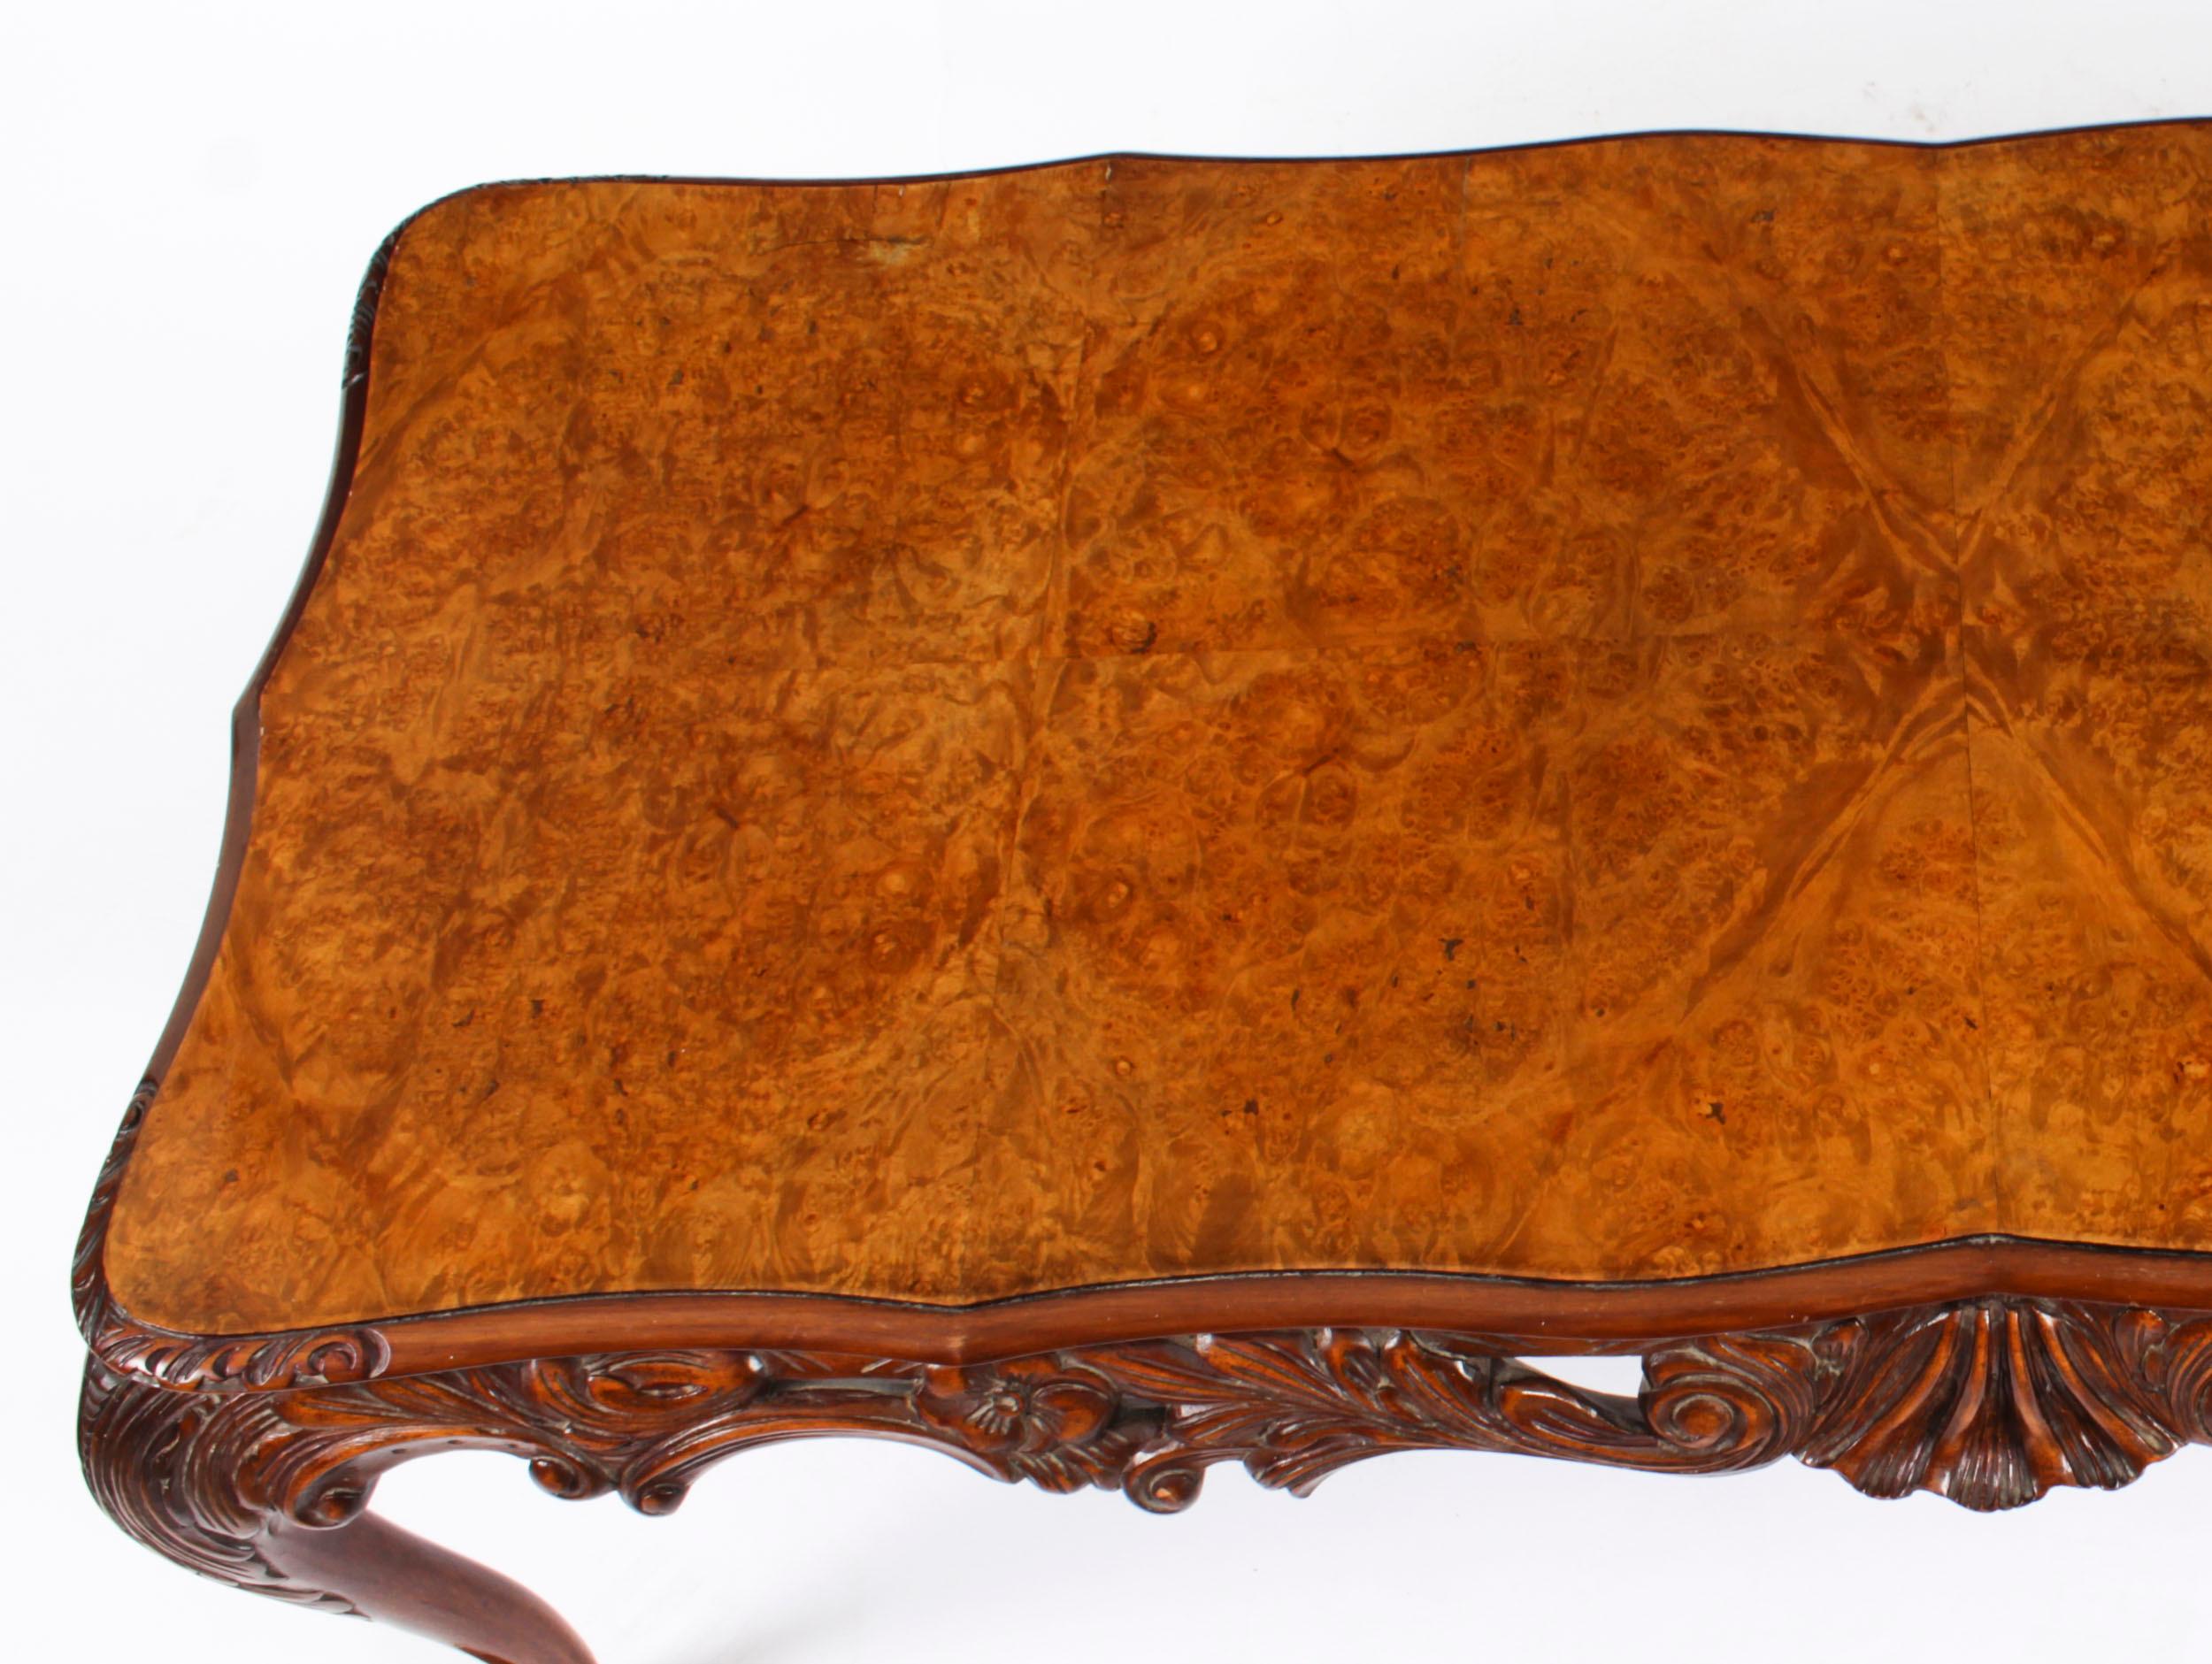 English Antique Queen Anne Revival Burr Walnut Coffee Table c.1920 For Sale